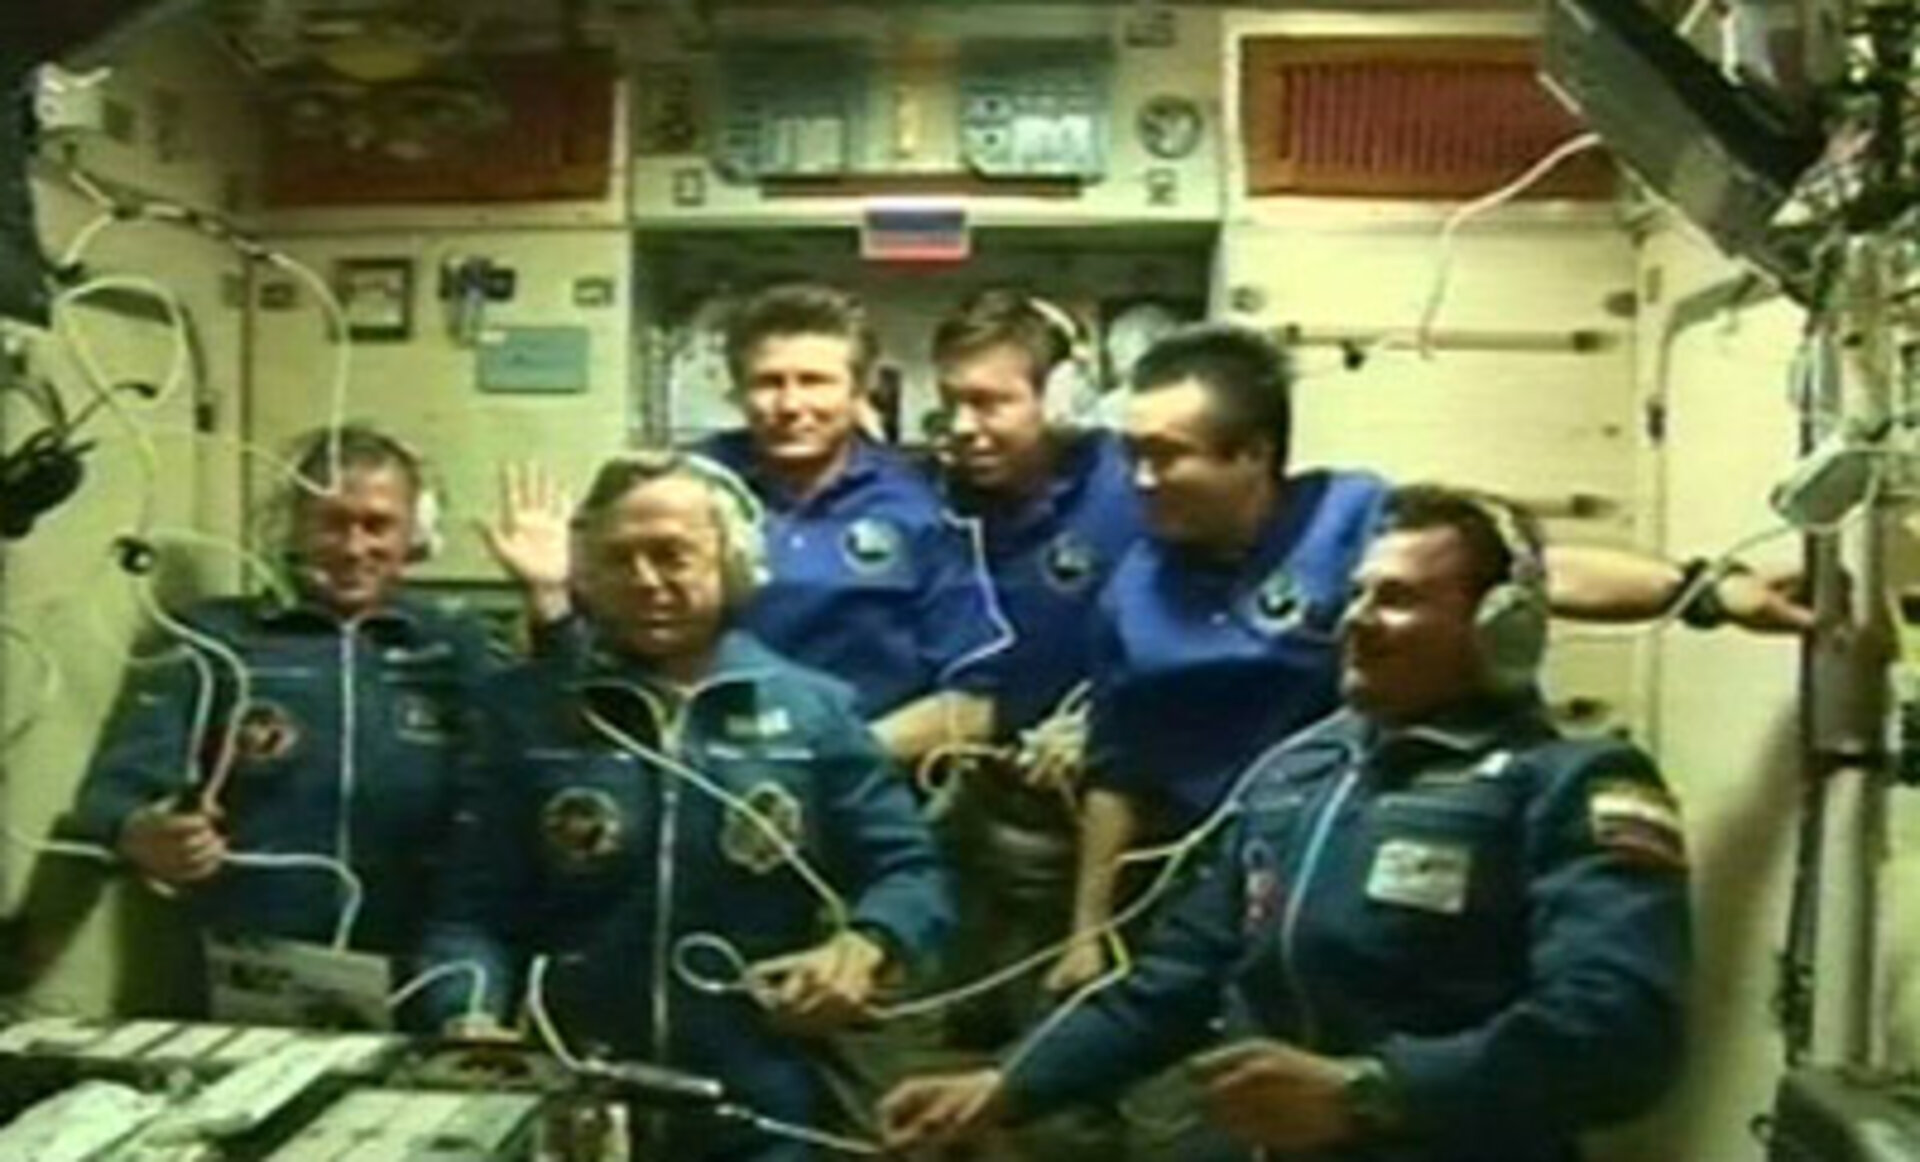 Expedition 20 - the first six member Station crew